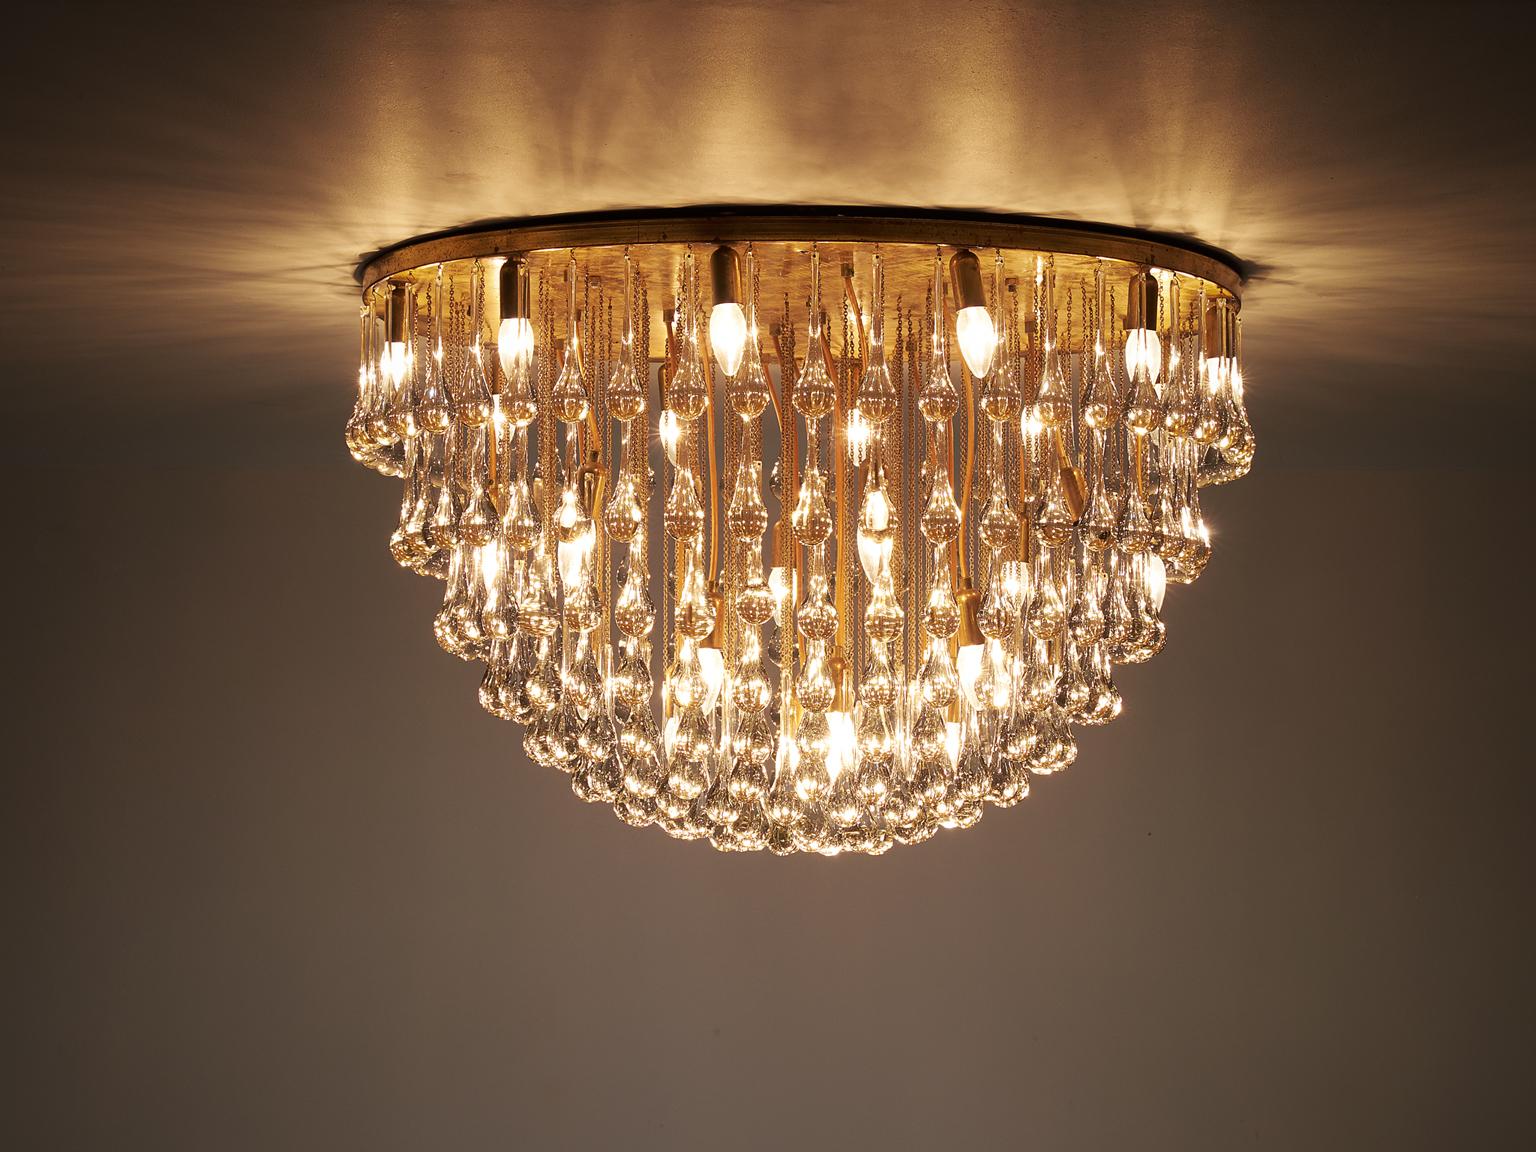 Mid-Century Modern Venini Large Chandelier in Brass with Glass Drops